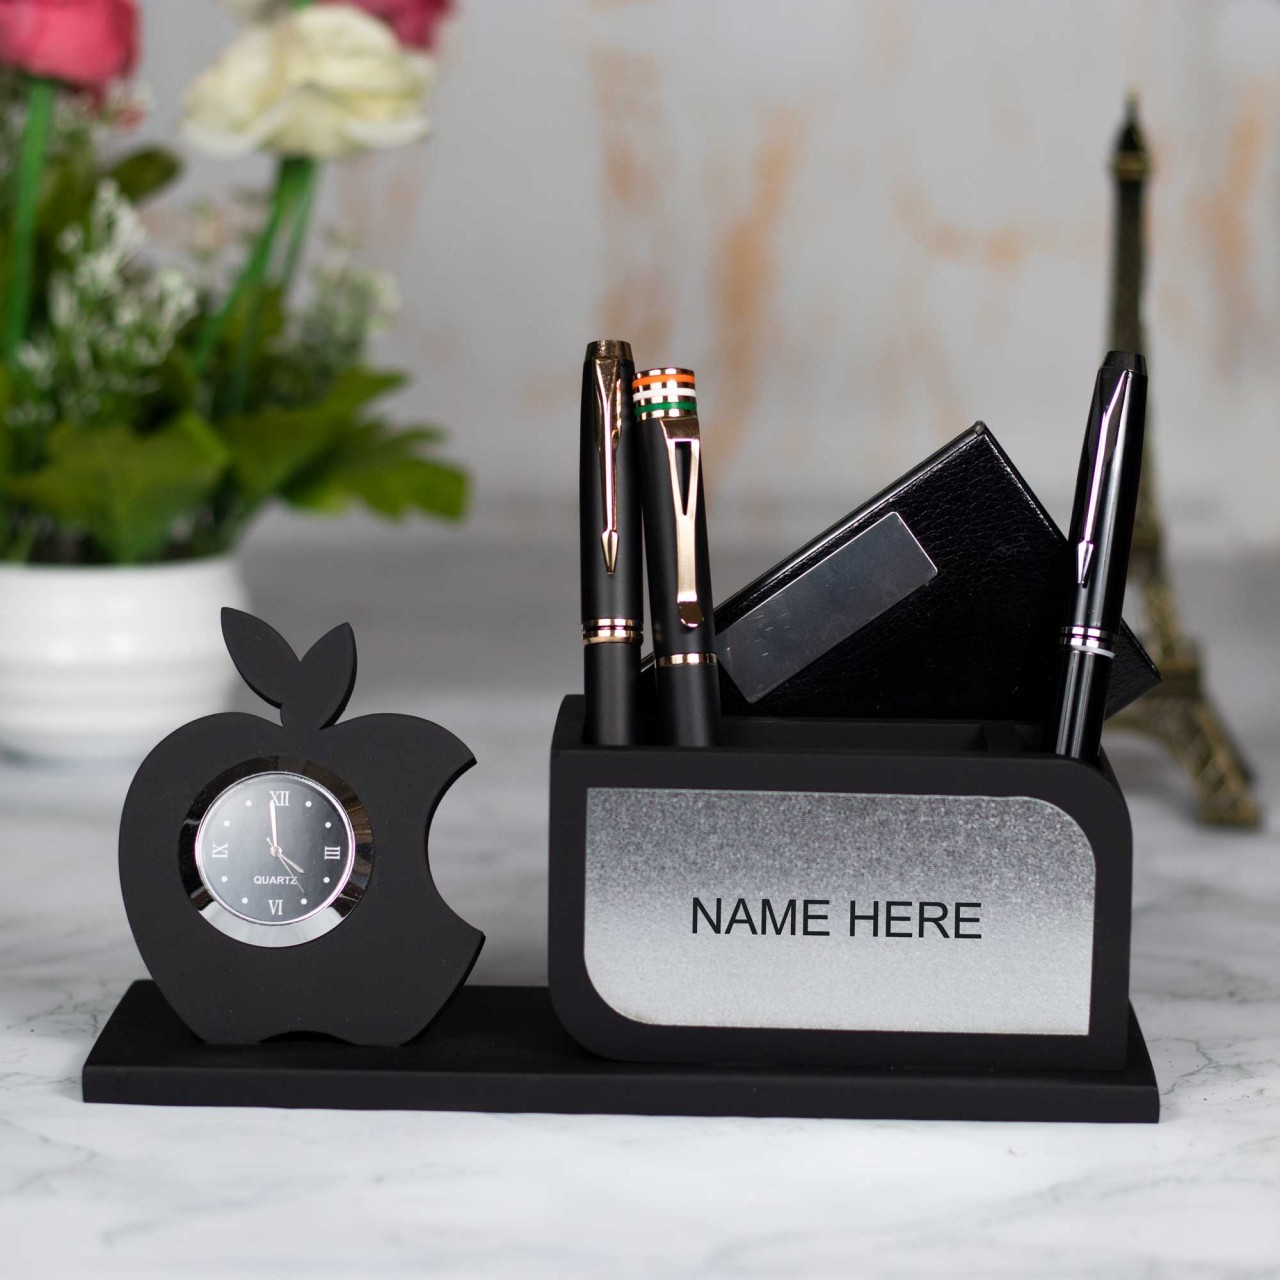 Apple shaped table watch attached with customized pens holder